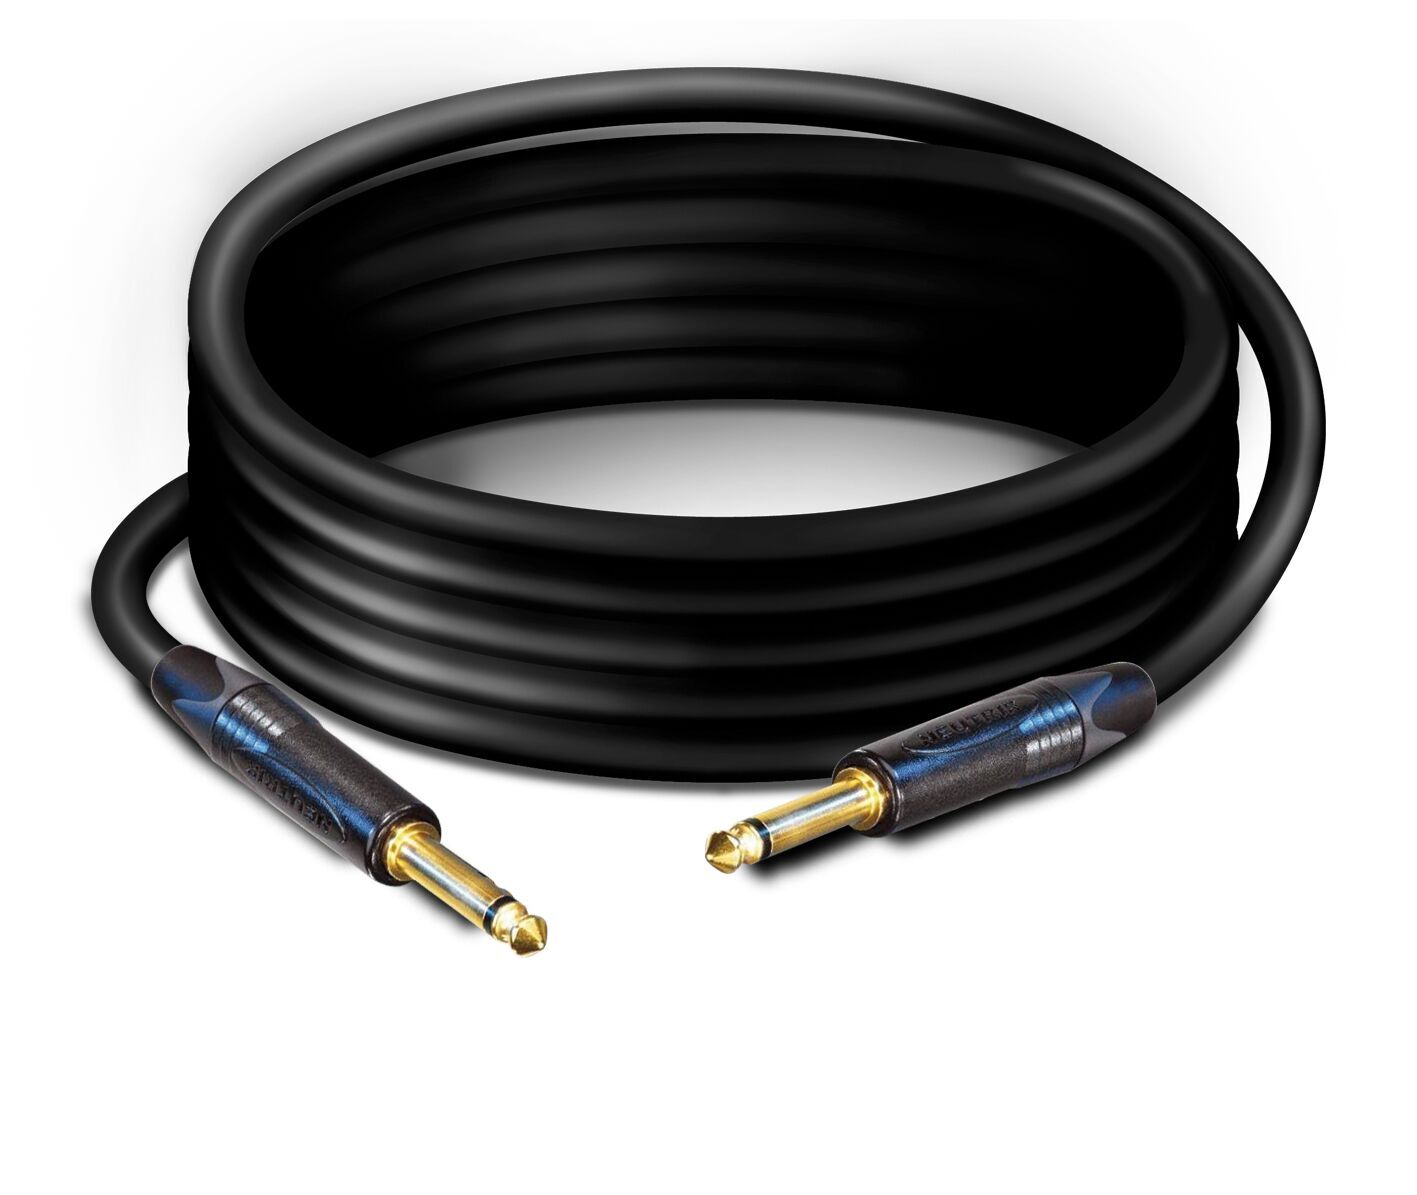 Guitar cable  NP2X-B  - NP2X-B  Tasker   cable  C285